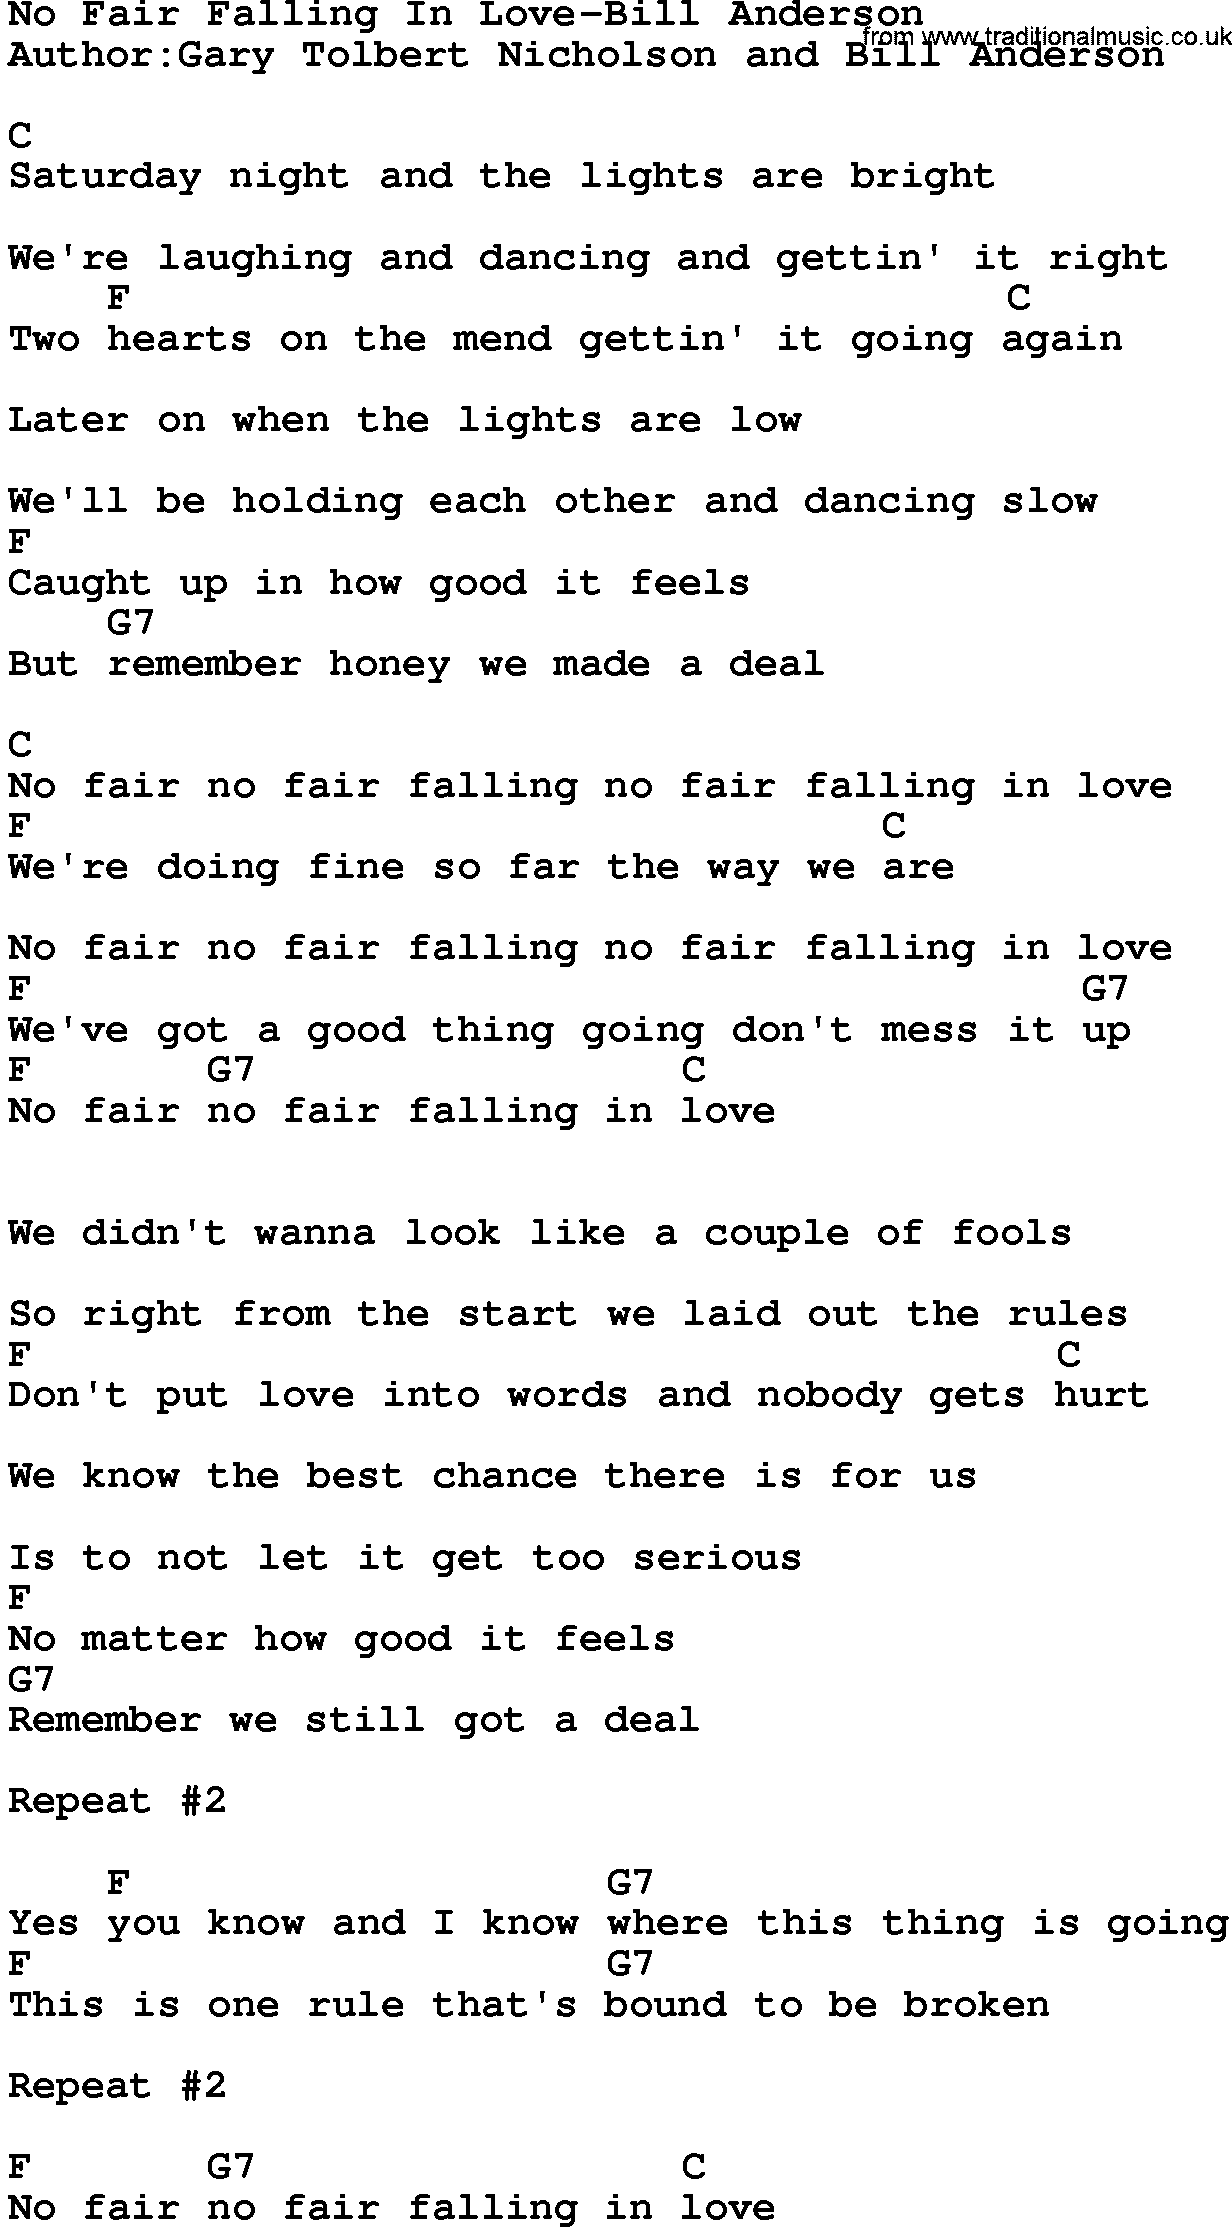 Country music song: No Fair Falling In Love-Bill Anderson lyrics and chords